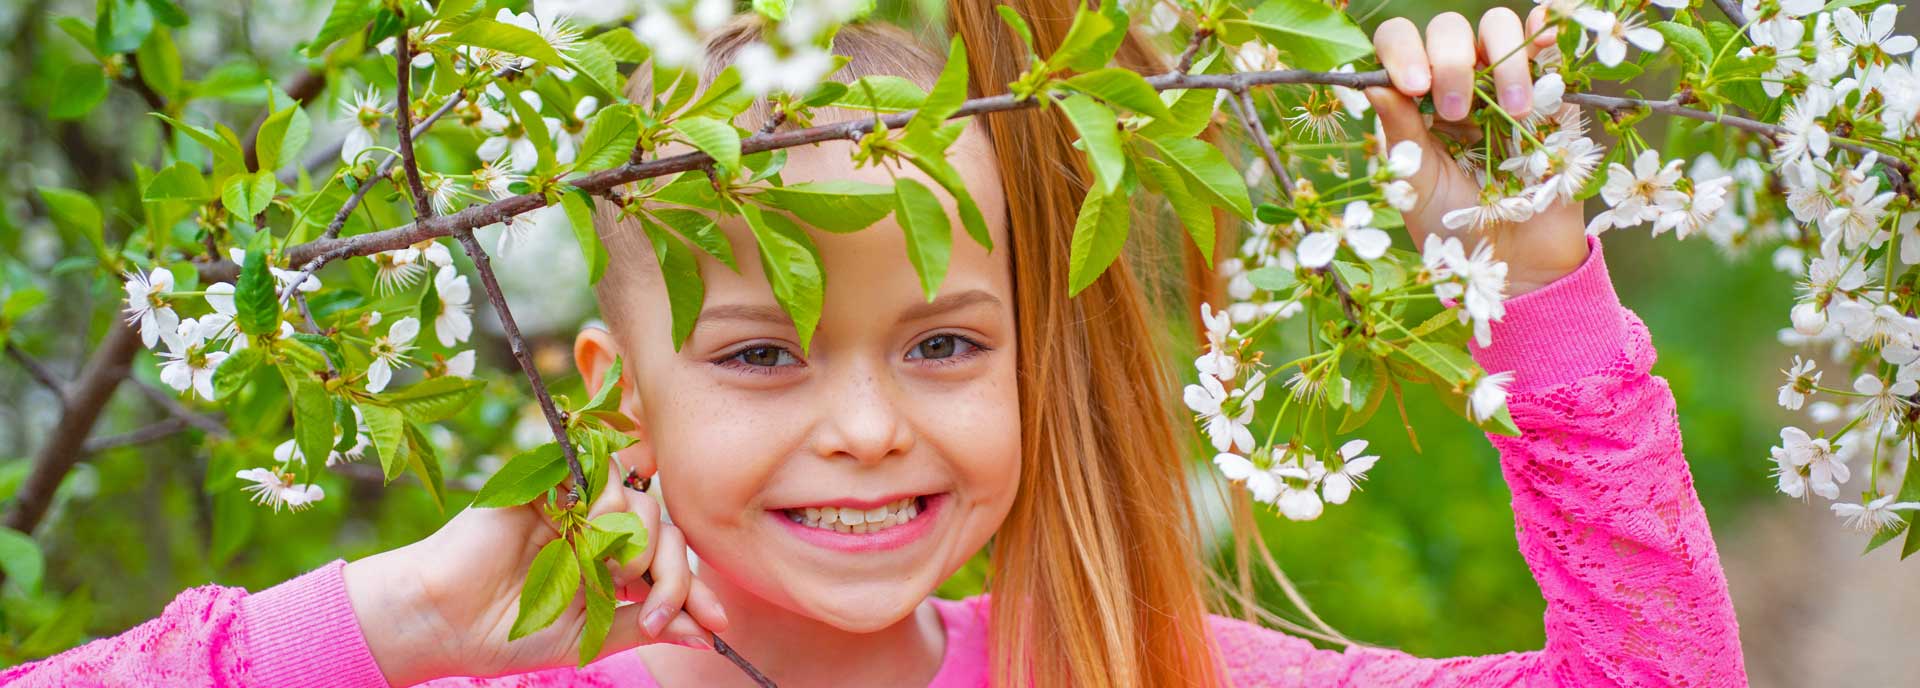 Close up of young girl smiling at camera standing among flowering tree branches.